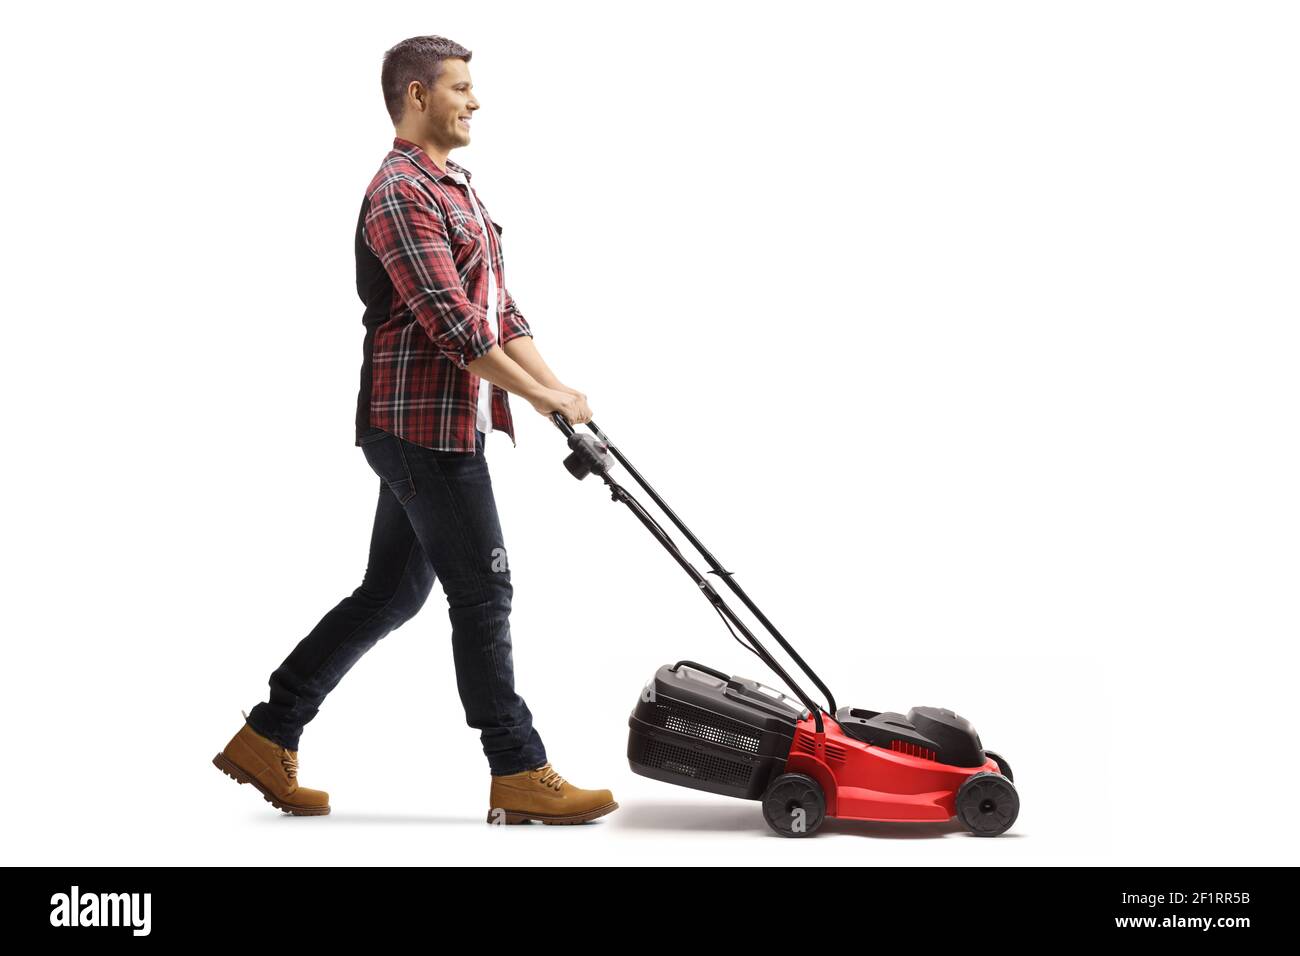 Full length profile shot of a young man working with a lawnmower isolated on white background Stock Photo